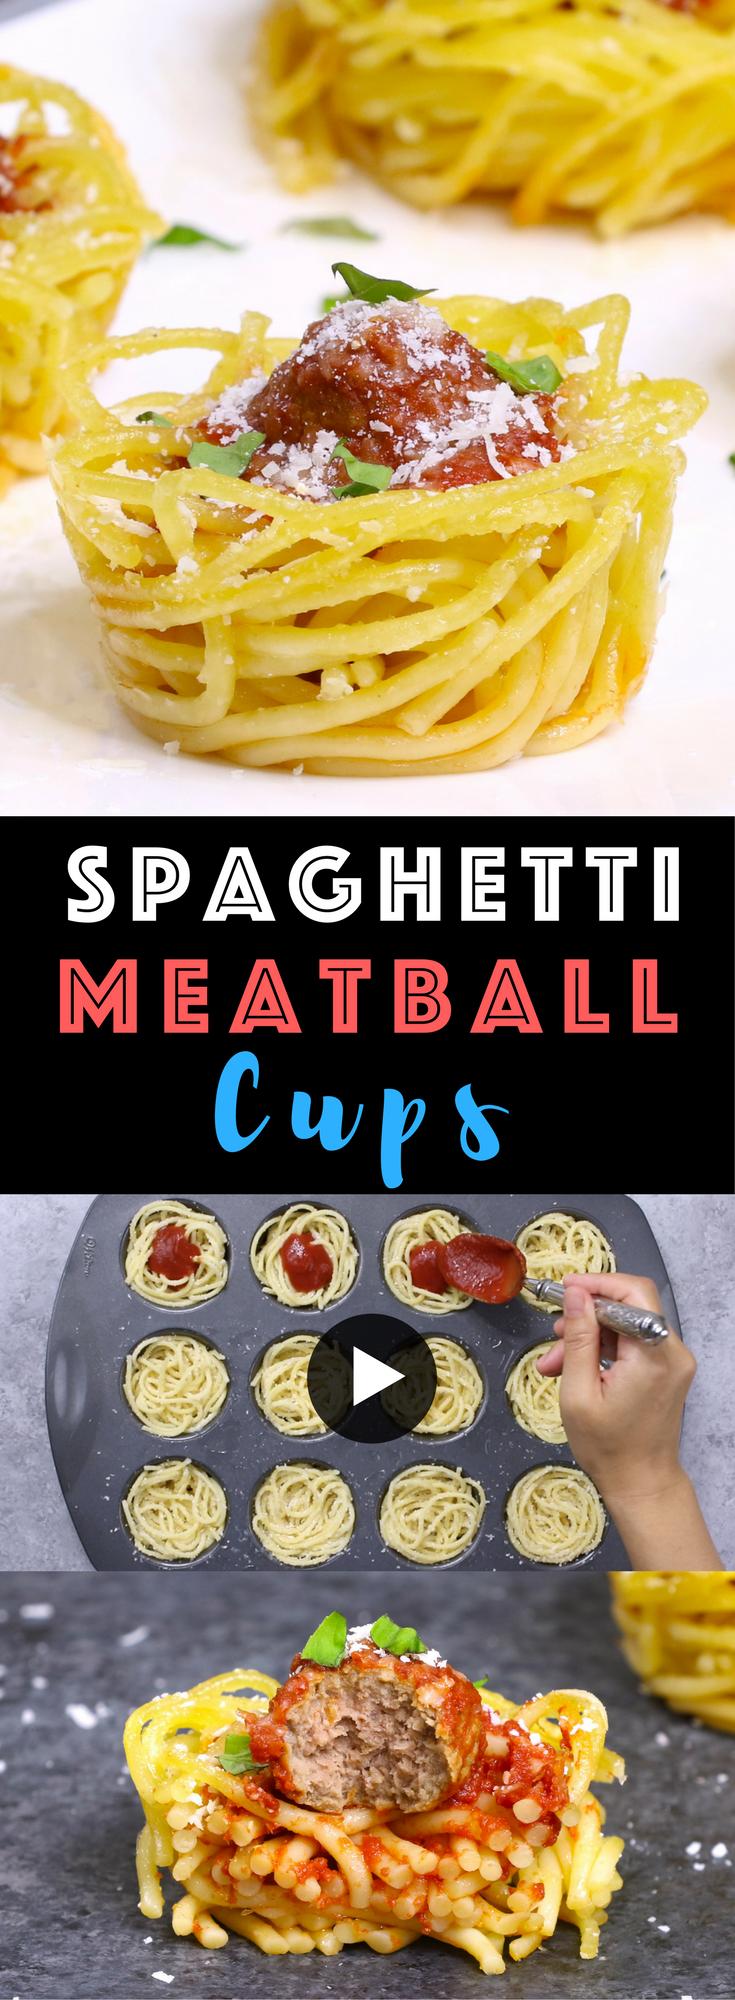 Easy Spaghetti Meatball - Warm, cheesy and delicious handheld spaghetti. A fun twist of classic spaghetti and meatball recipe. Shape the spaghetti into cups with your muffin tin. All you need is a few ingredients: spaghetti, pasta sauce, parmesan cheese, meatballs, salt and oil. So Good! The perfect snack, lunch or quick weeknight dinner! Quick and easy recipe. Party food, easy dinner. Video recipe. | Tipbuzz.com